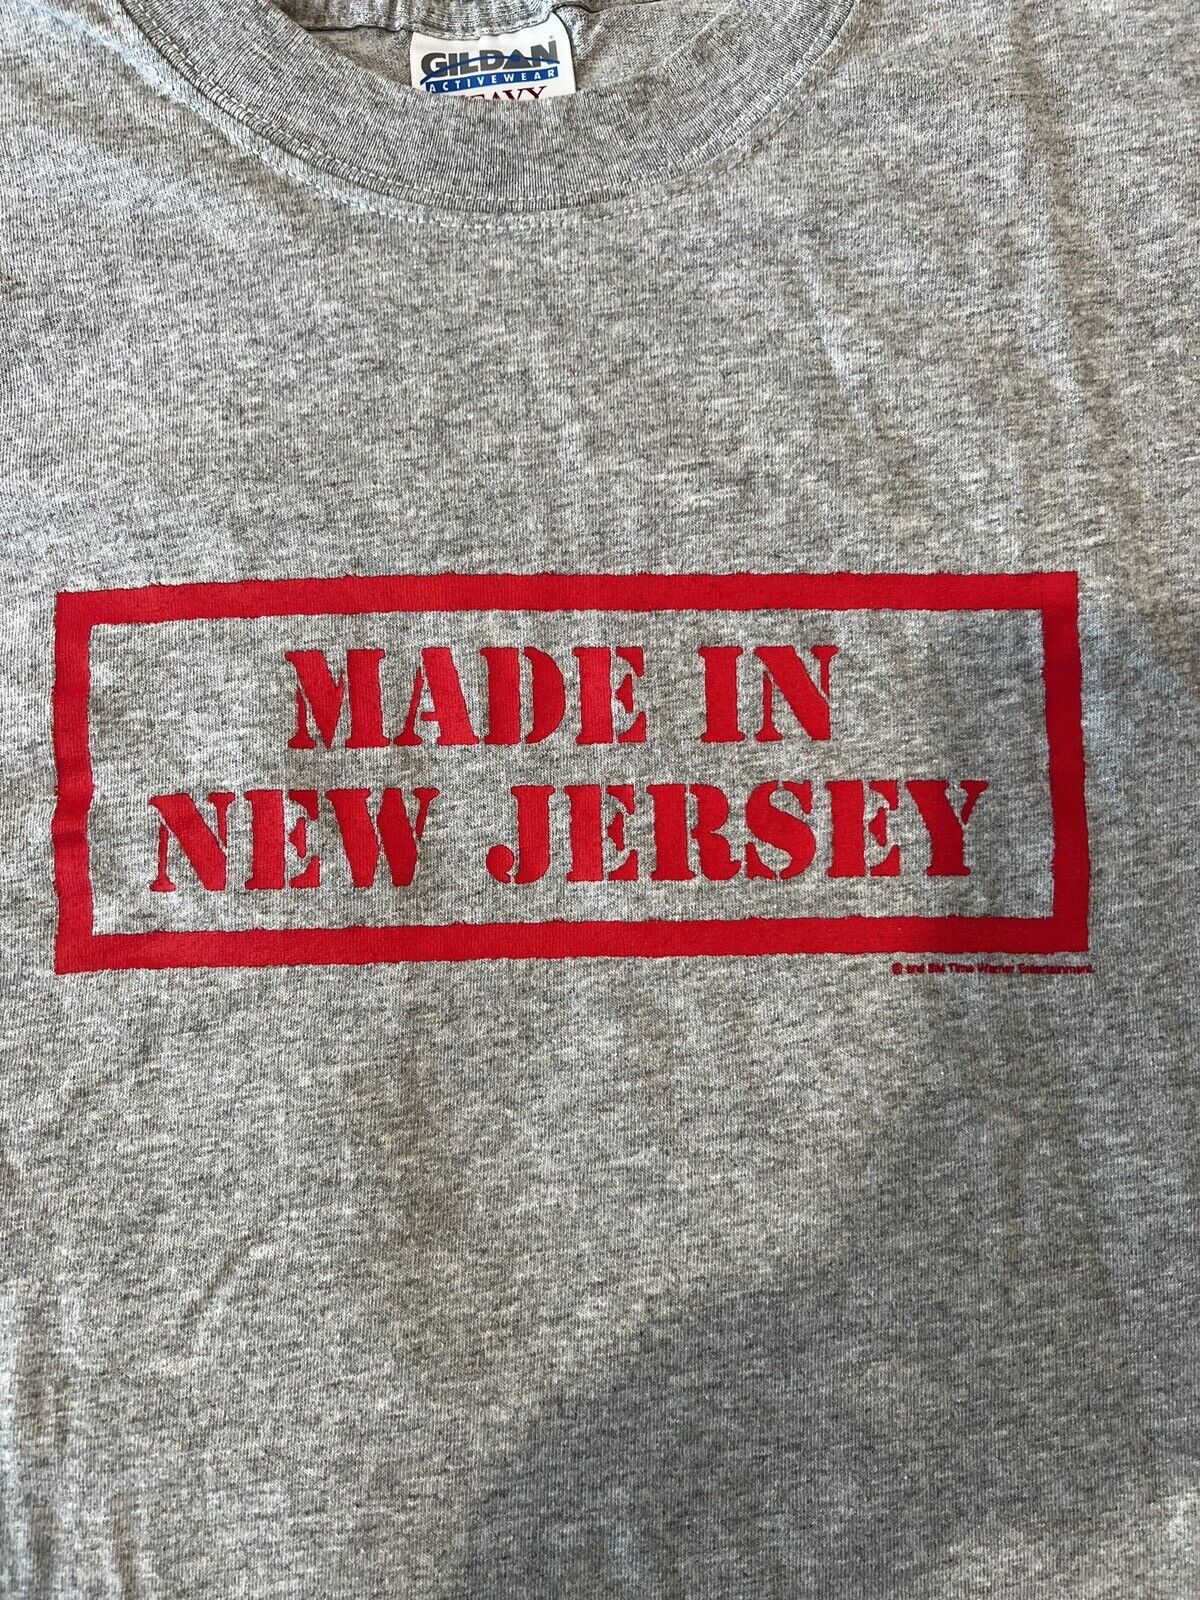 Vintage The Sopranos - Made in New Jersey - Promo… - image 2